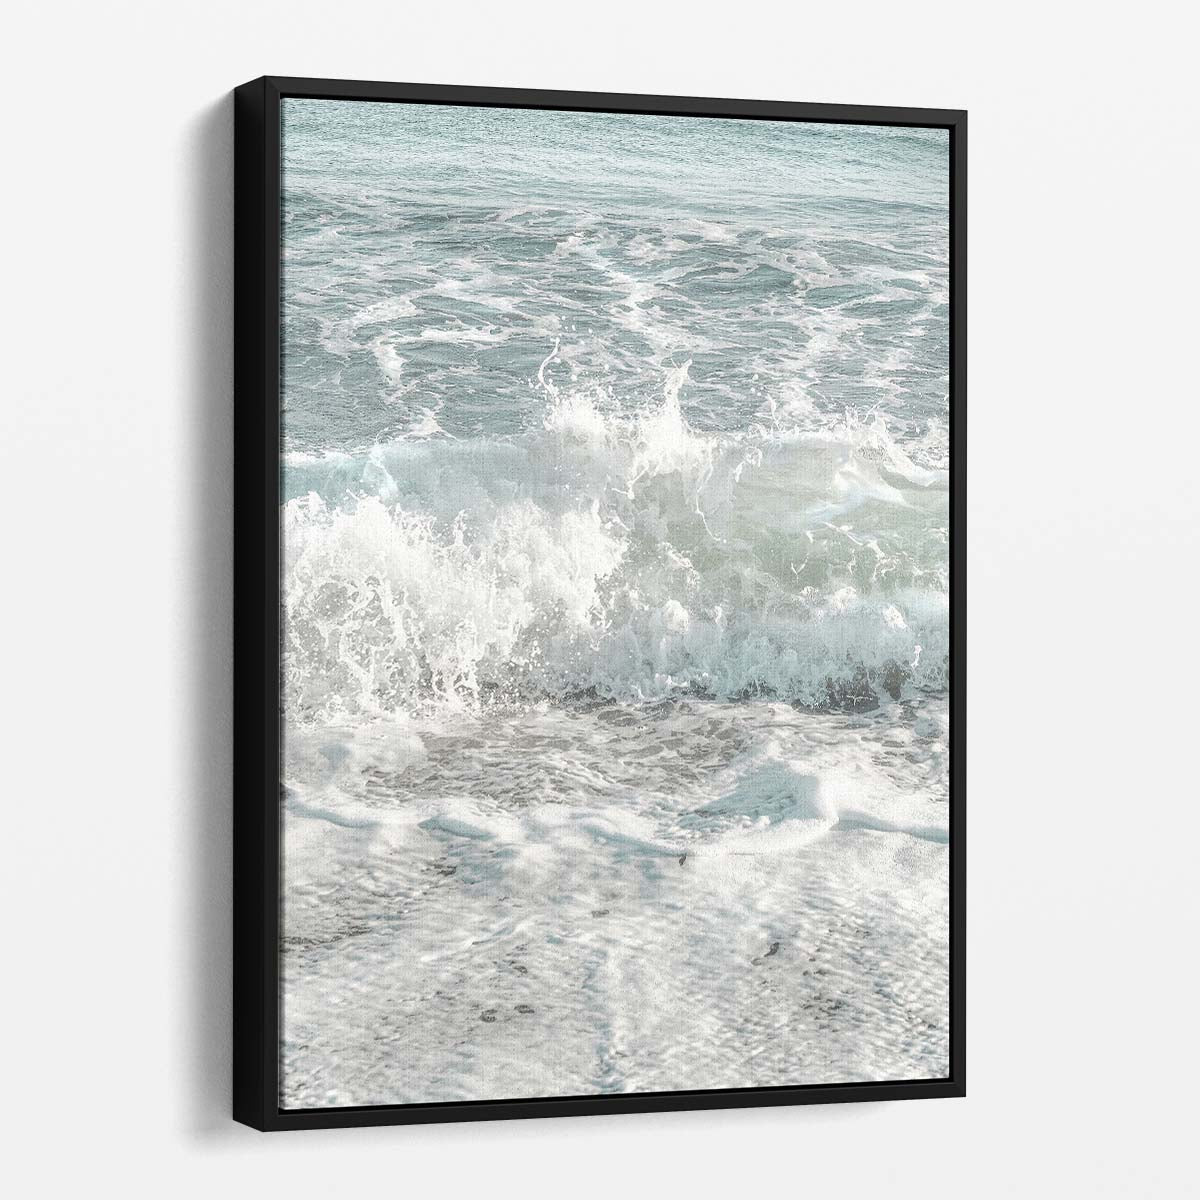 Coastal Abstract Seascape Faded Water Wave Beach Photography Art by Luxuriance Designs, made in USA